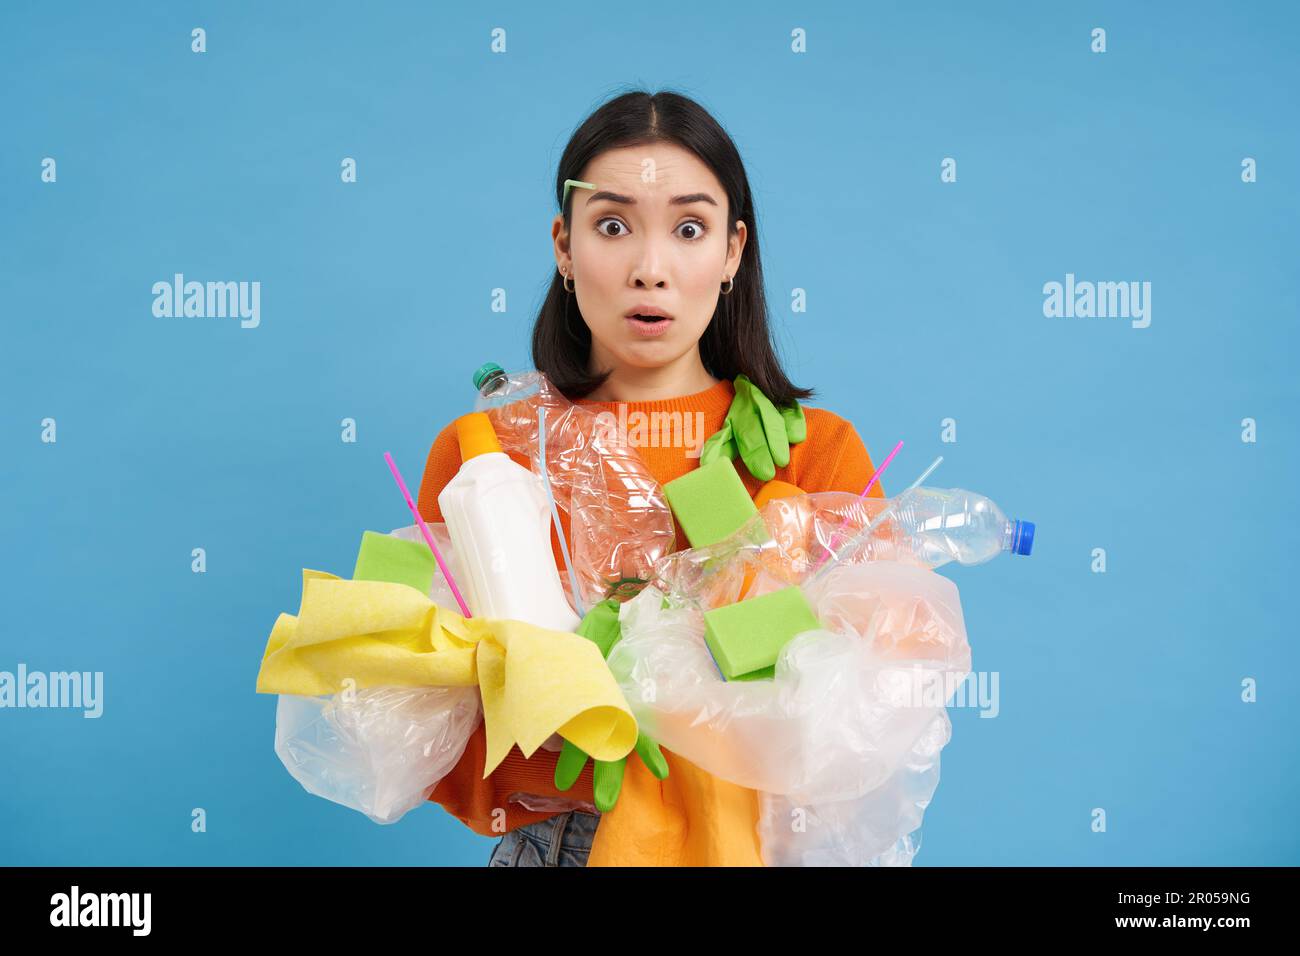 Young confused asian girl with different types of plastic, learns how to recycle, saving enviroment, sorting garbage, blue background. Stock Photo